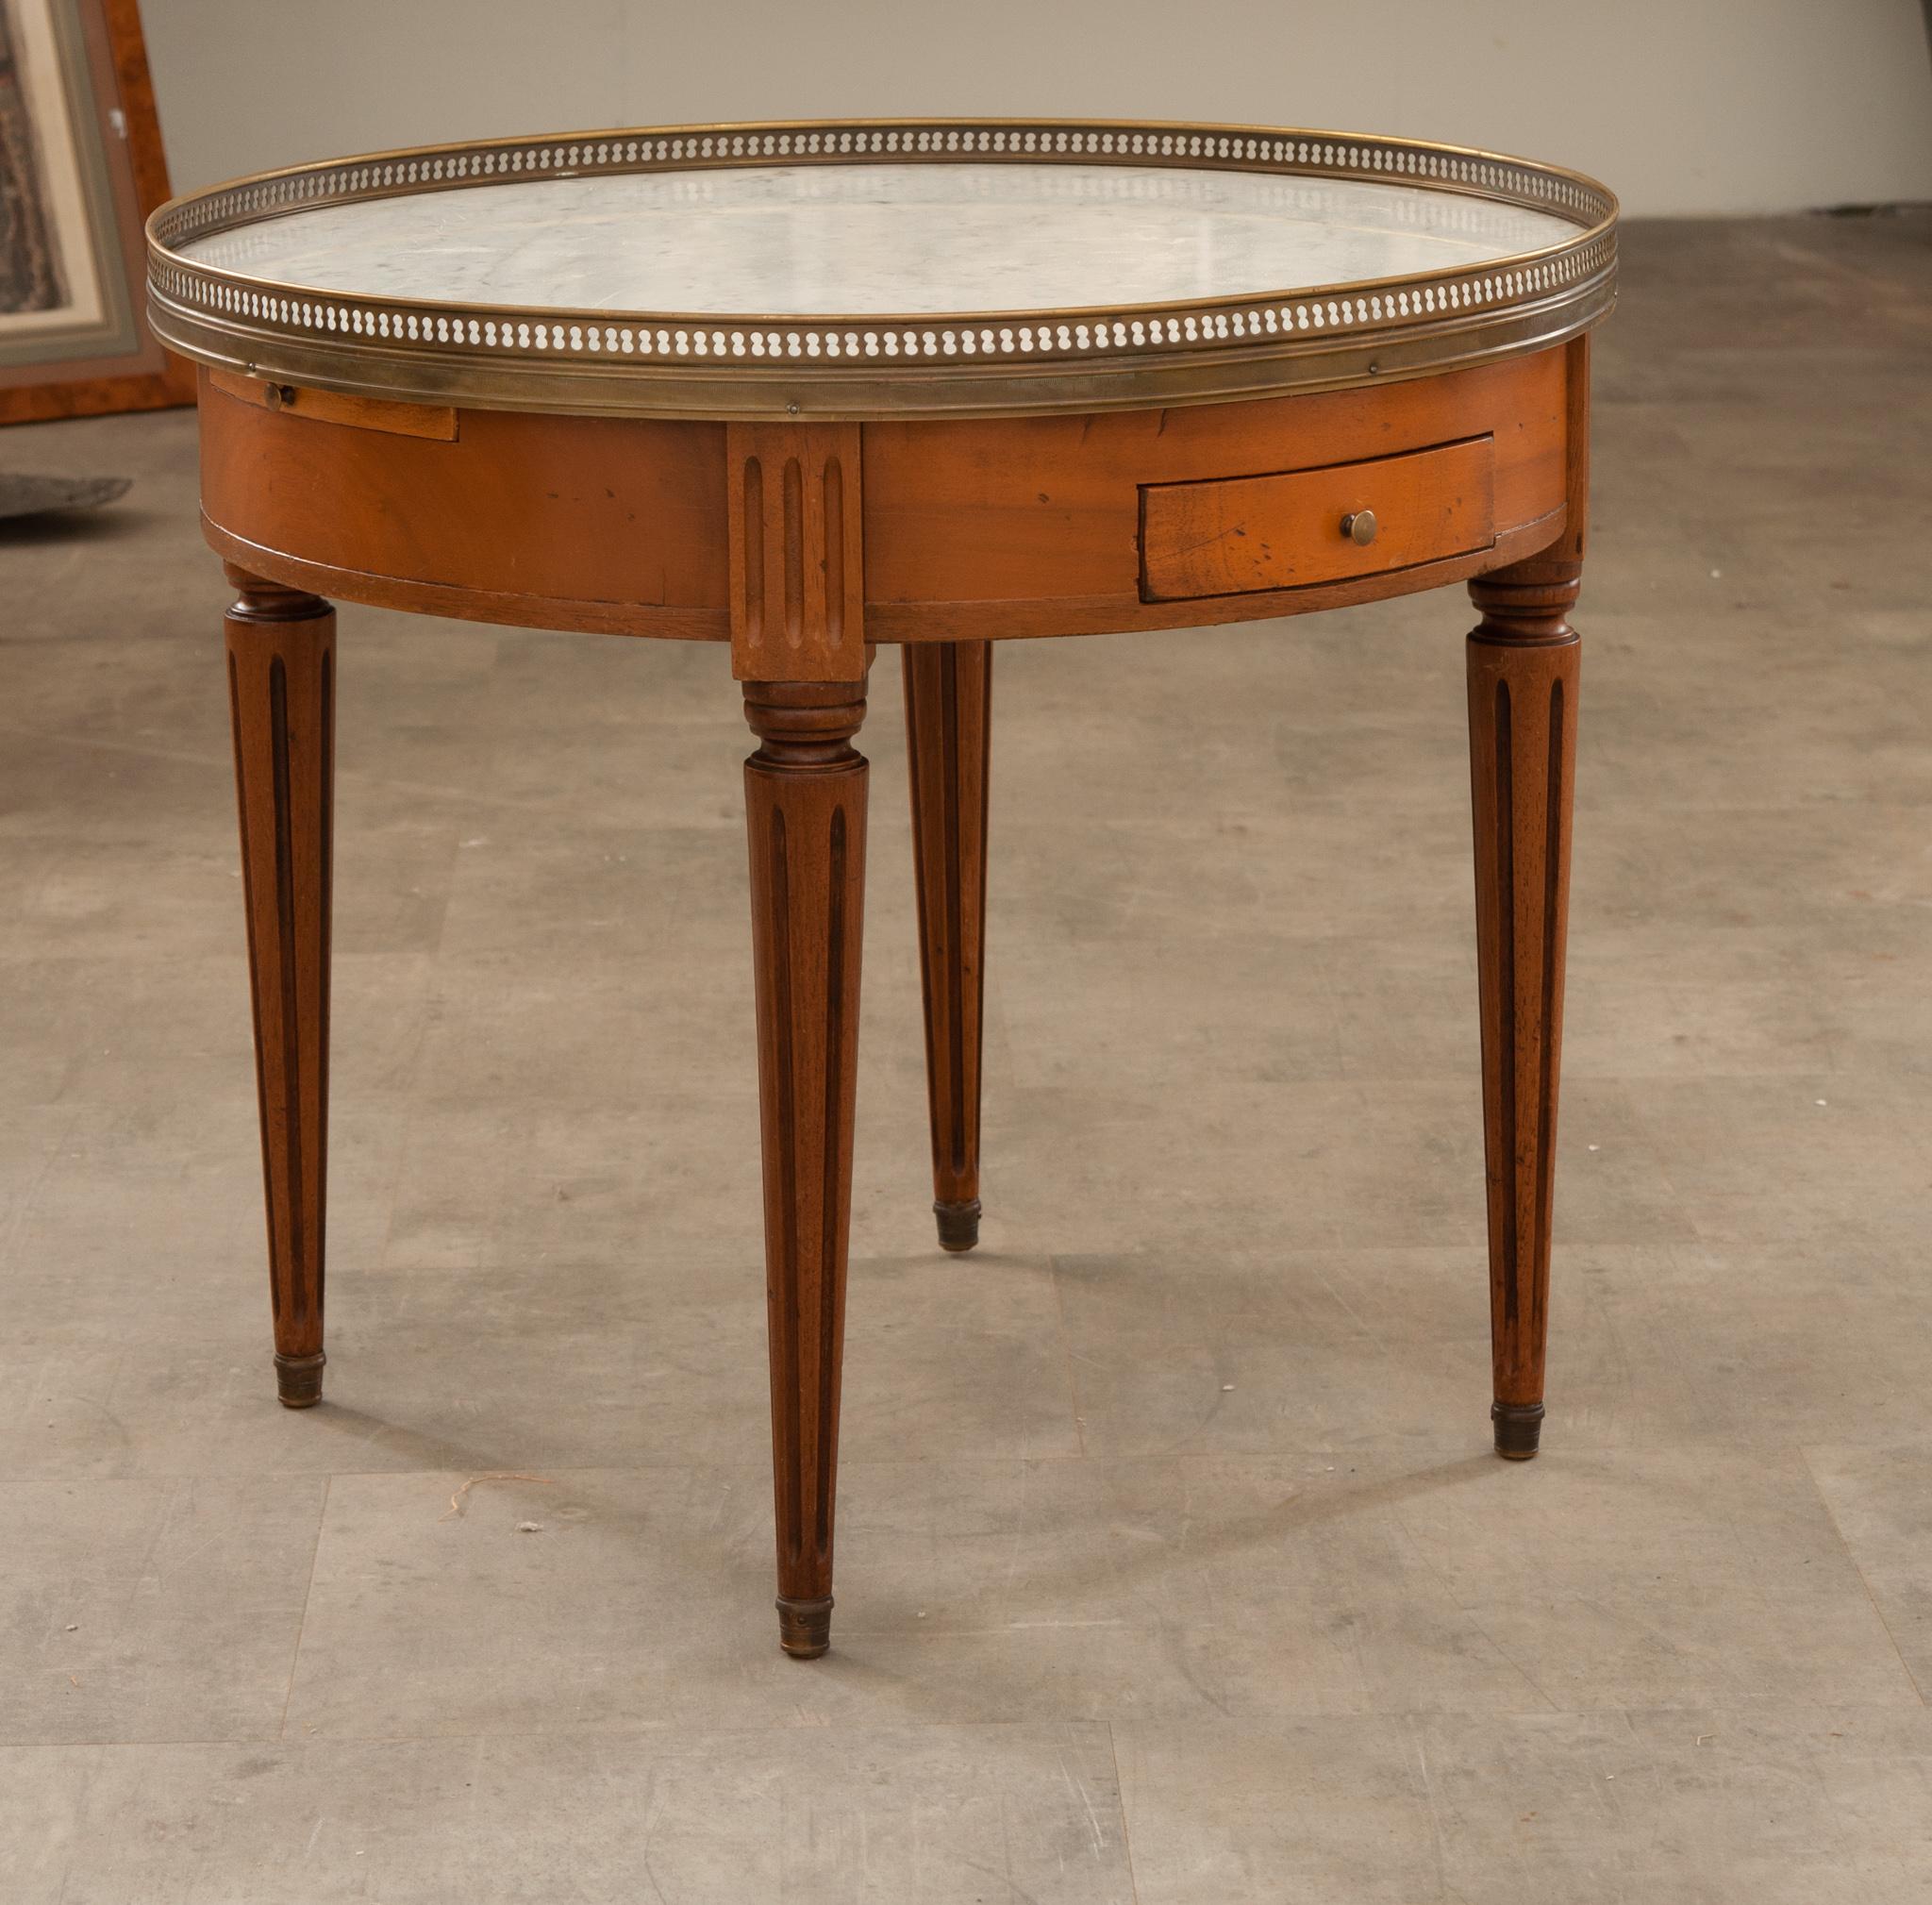 A charming French mahogany gueridon bouillotte table originally used for playing cards. A classic example of a Louis XVI style gueridon from the 20th century. Topped with white marble and surrounded by a pierced brass gallery that’s nicely